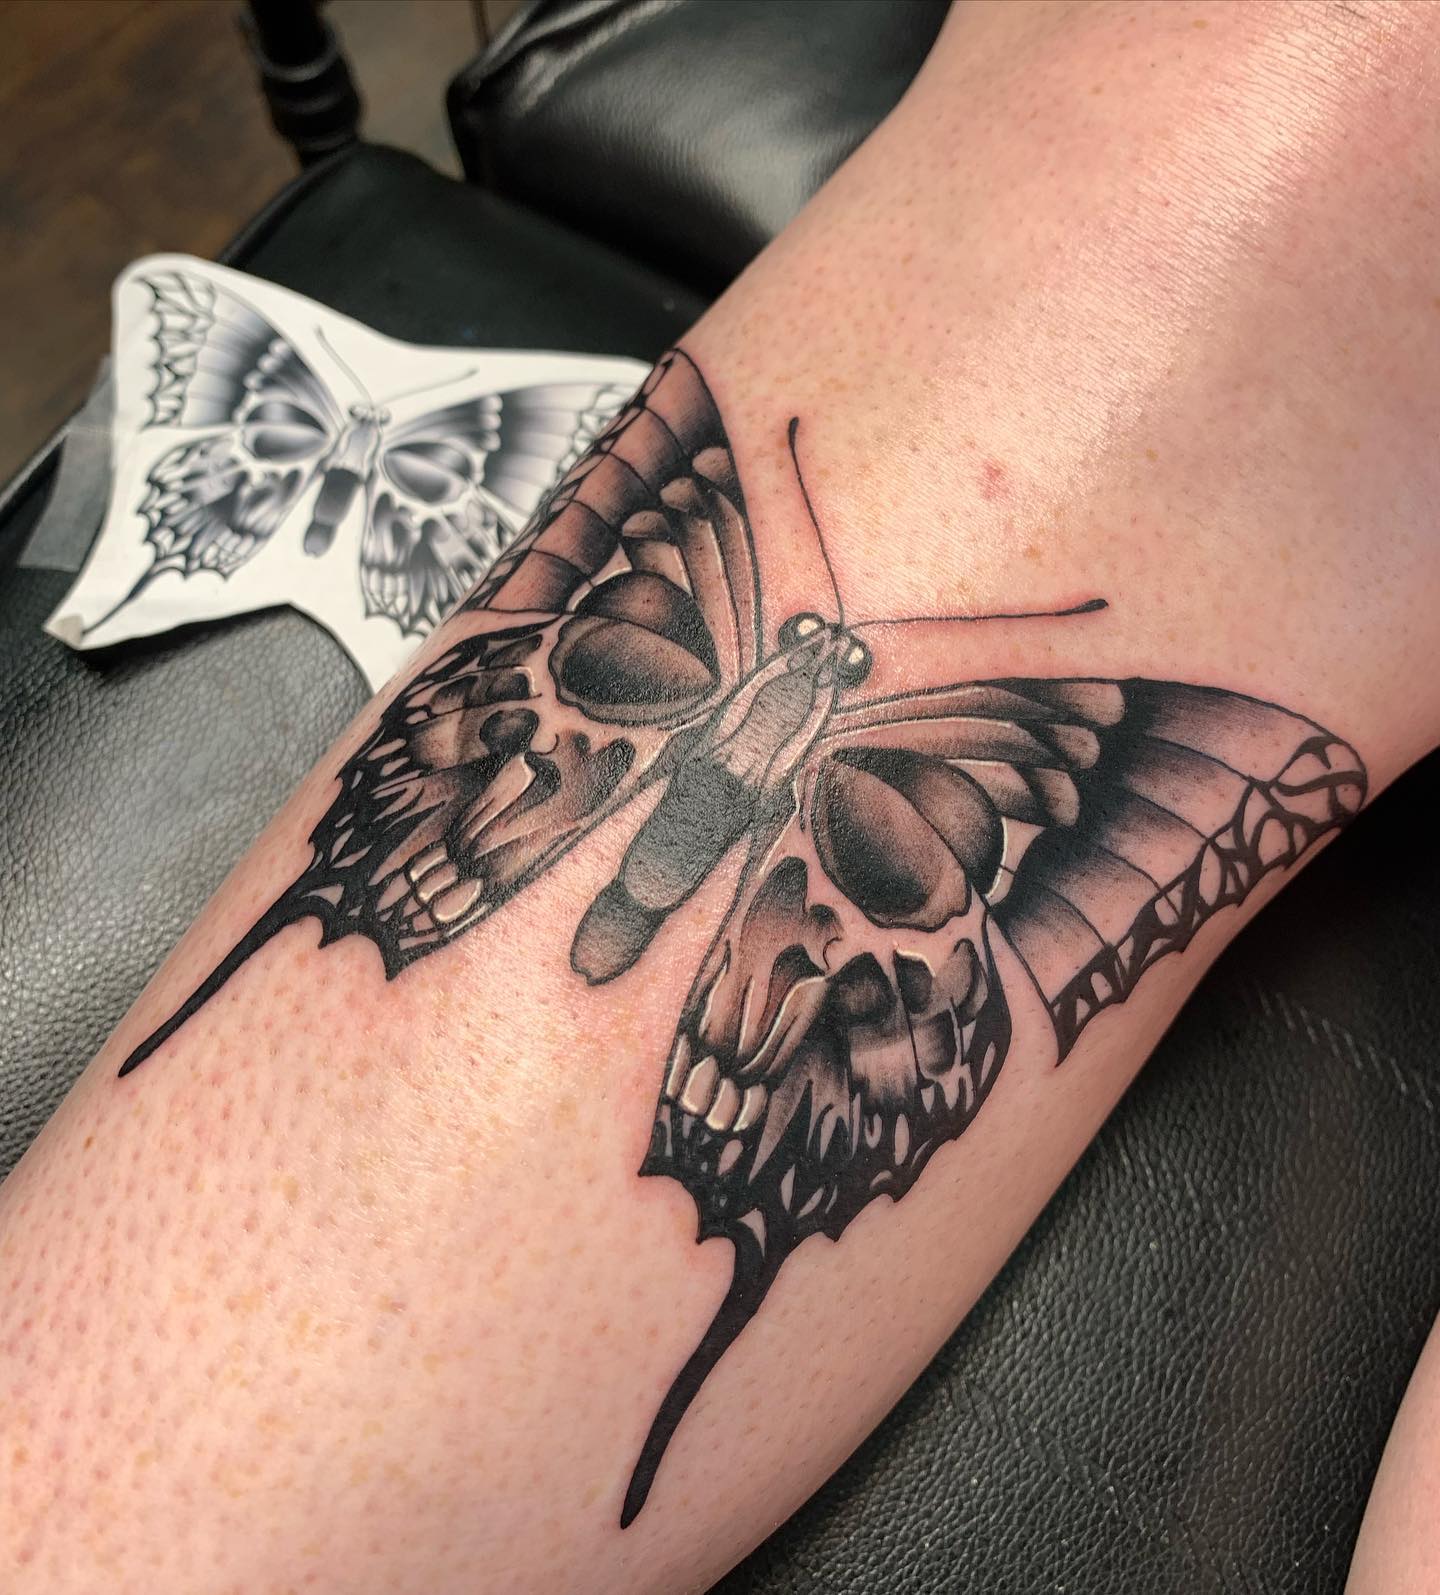 11 Butterfly With Skull Tattoo Ideas That Will Blow Your Mind  alexie